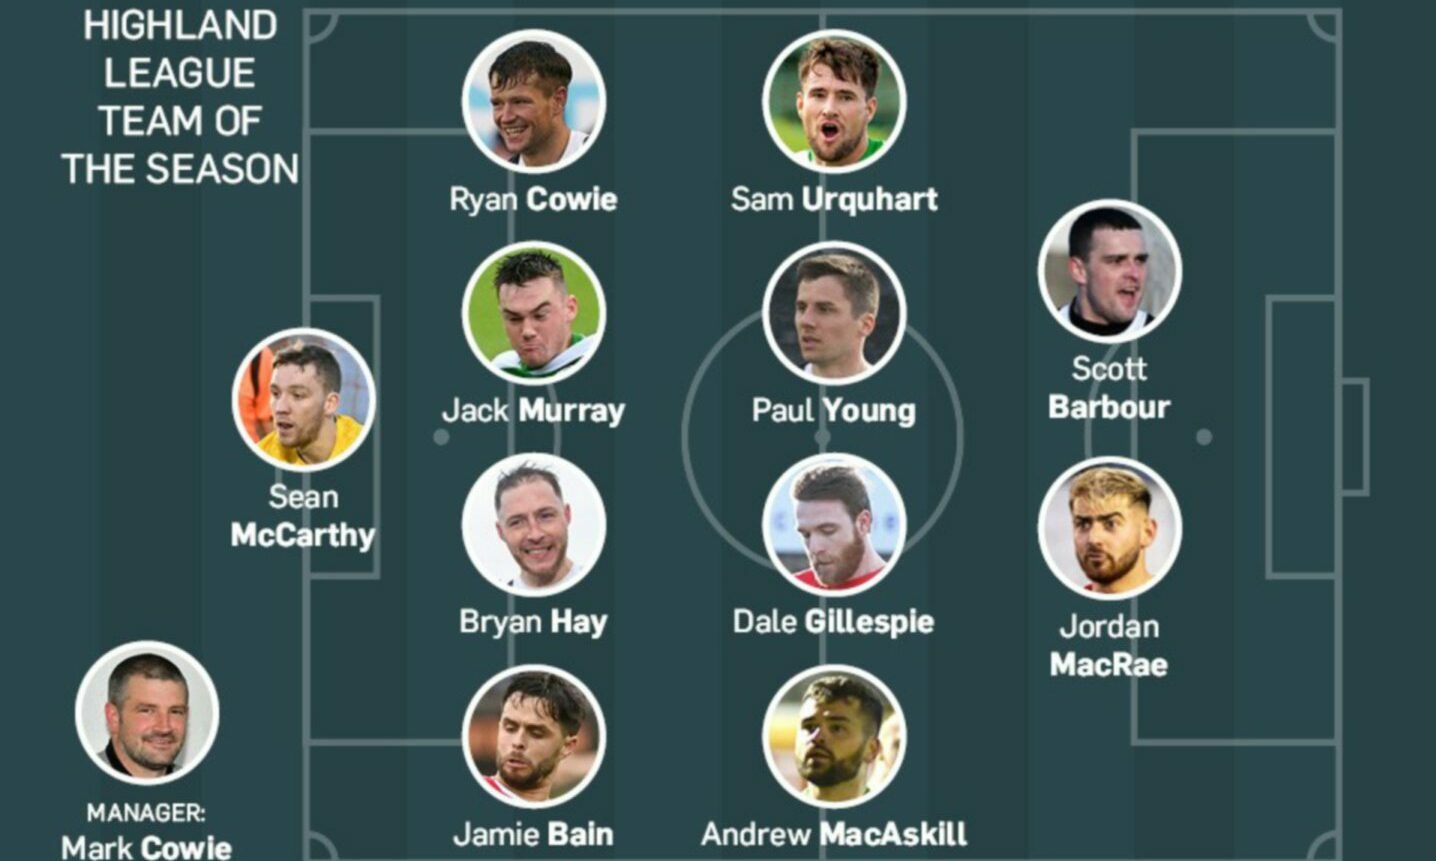 The side selected by Callum Law as his 2021-22 Breedon Highland League team of the season